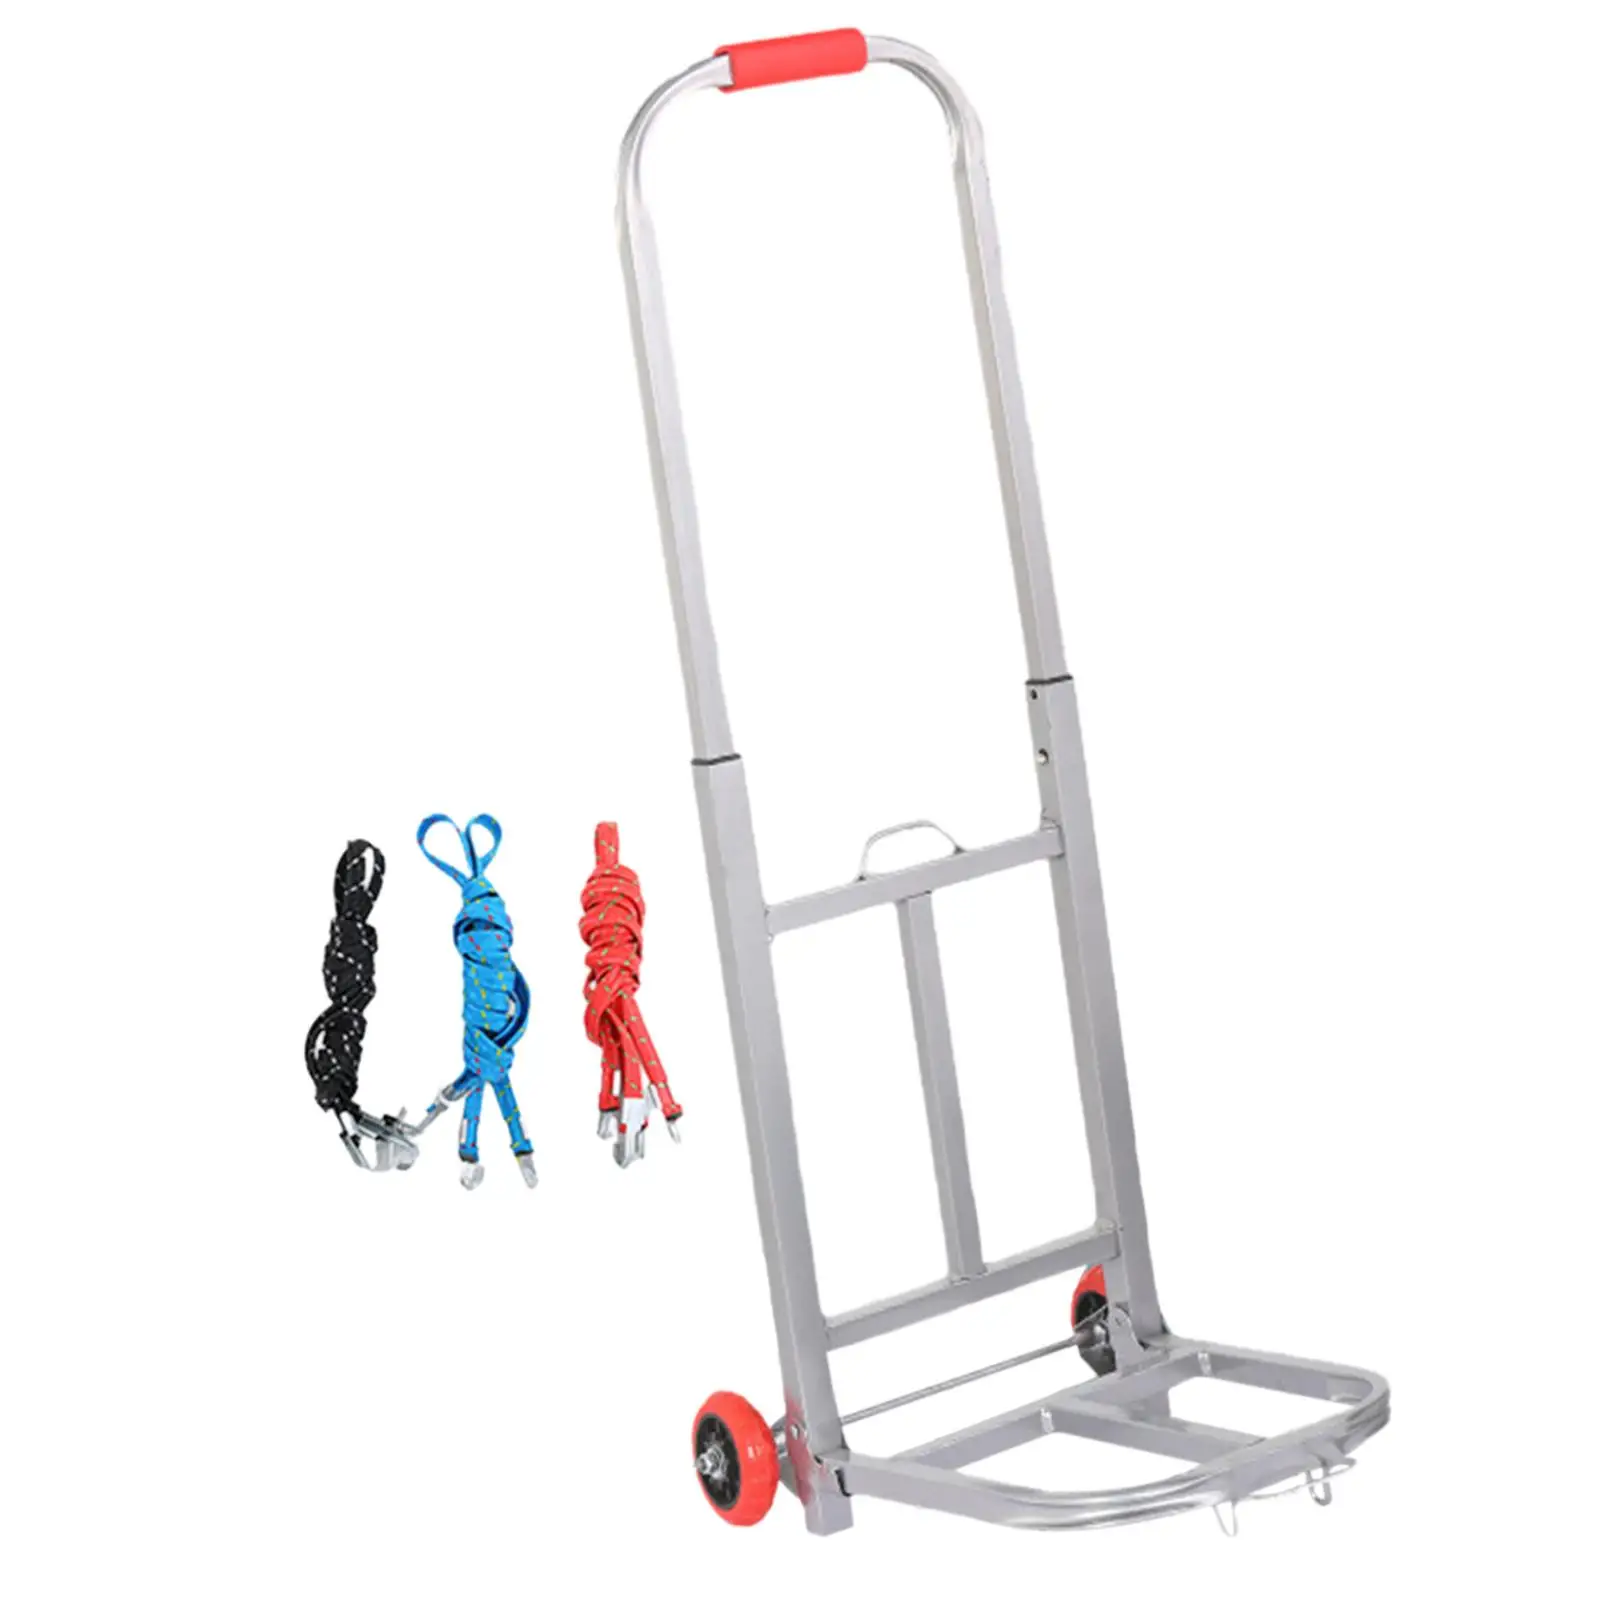 Foldable Folding Hand Truck Luggage Handcart Adjustable Handle for Couriers